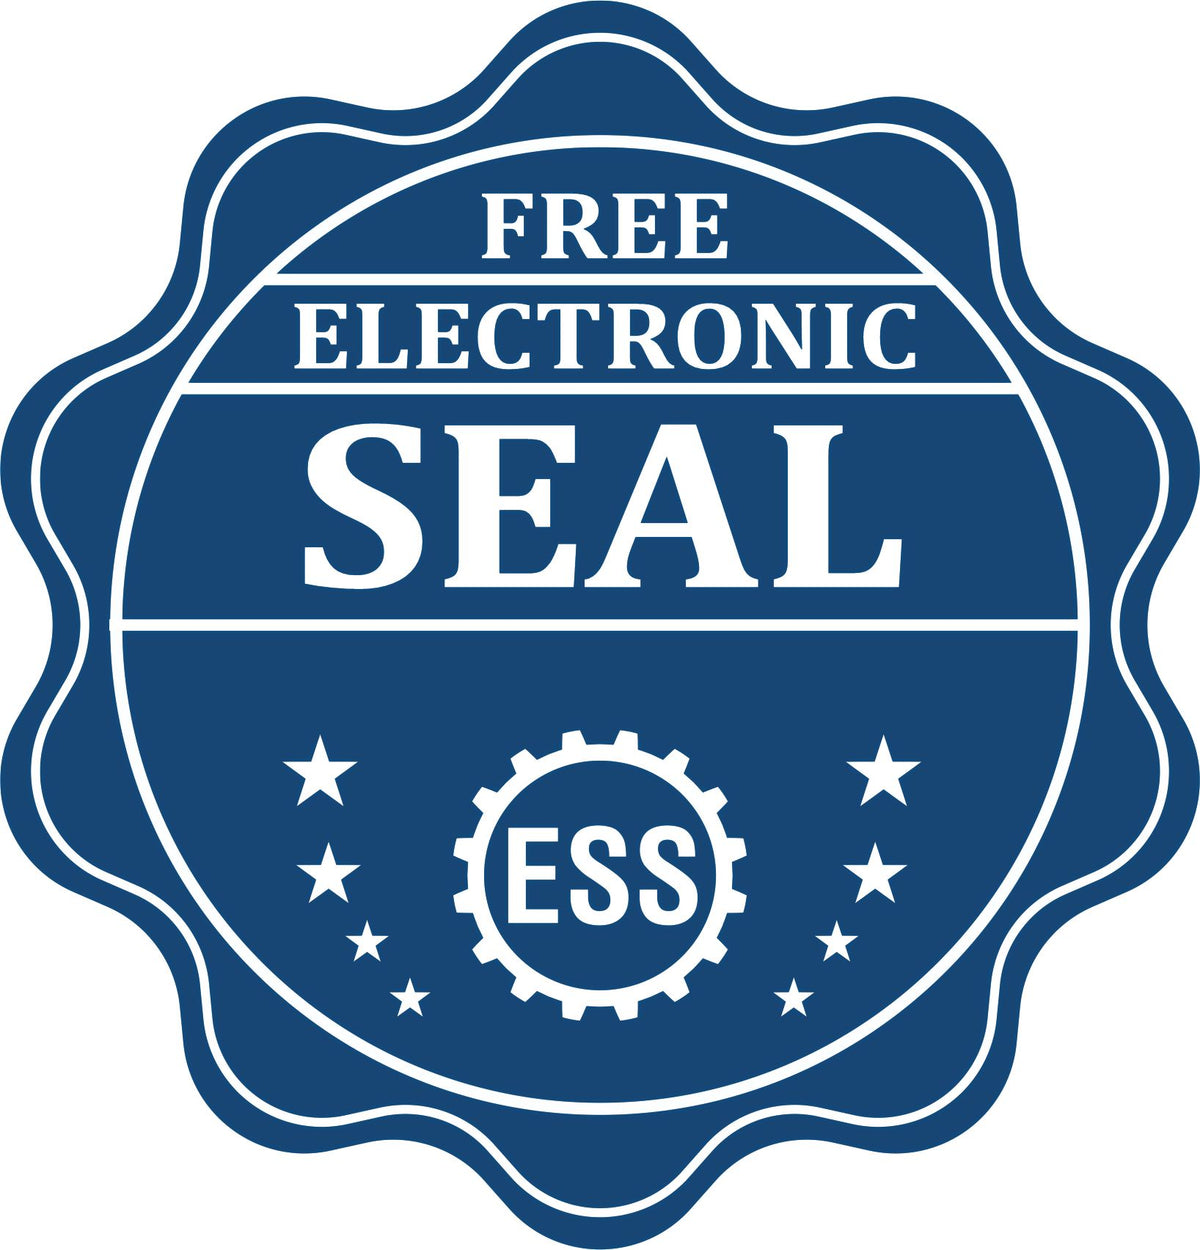 A badge showing a free electronic seal for the Heavy Duty Cast Iron Ohio Engineer Seal Embosser with stars and the ESS gear on the emblem.